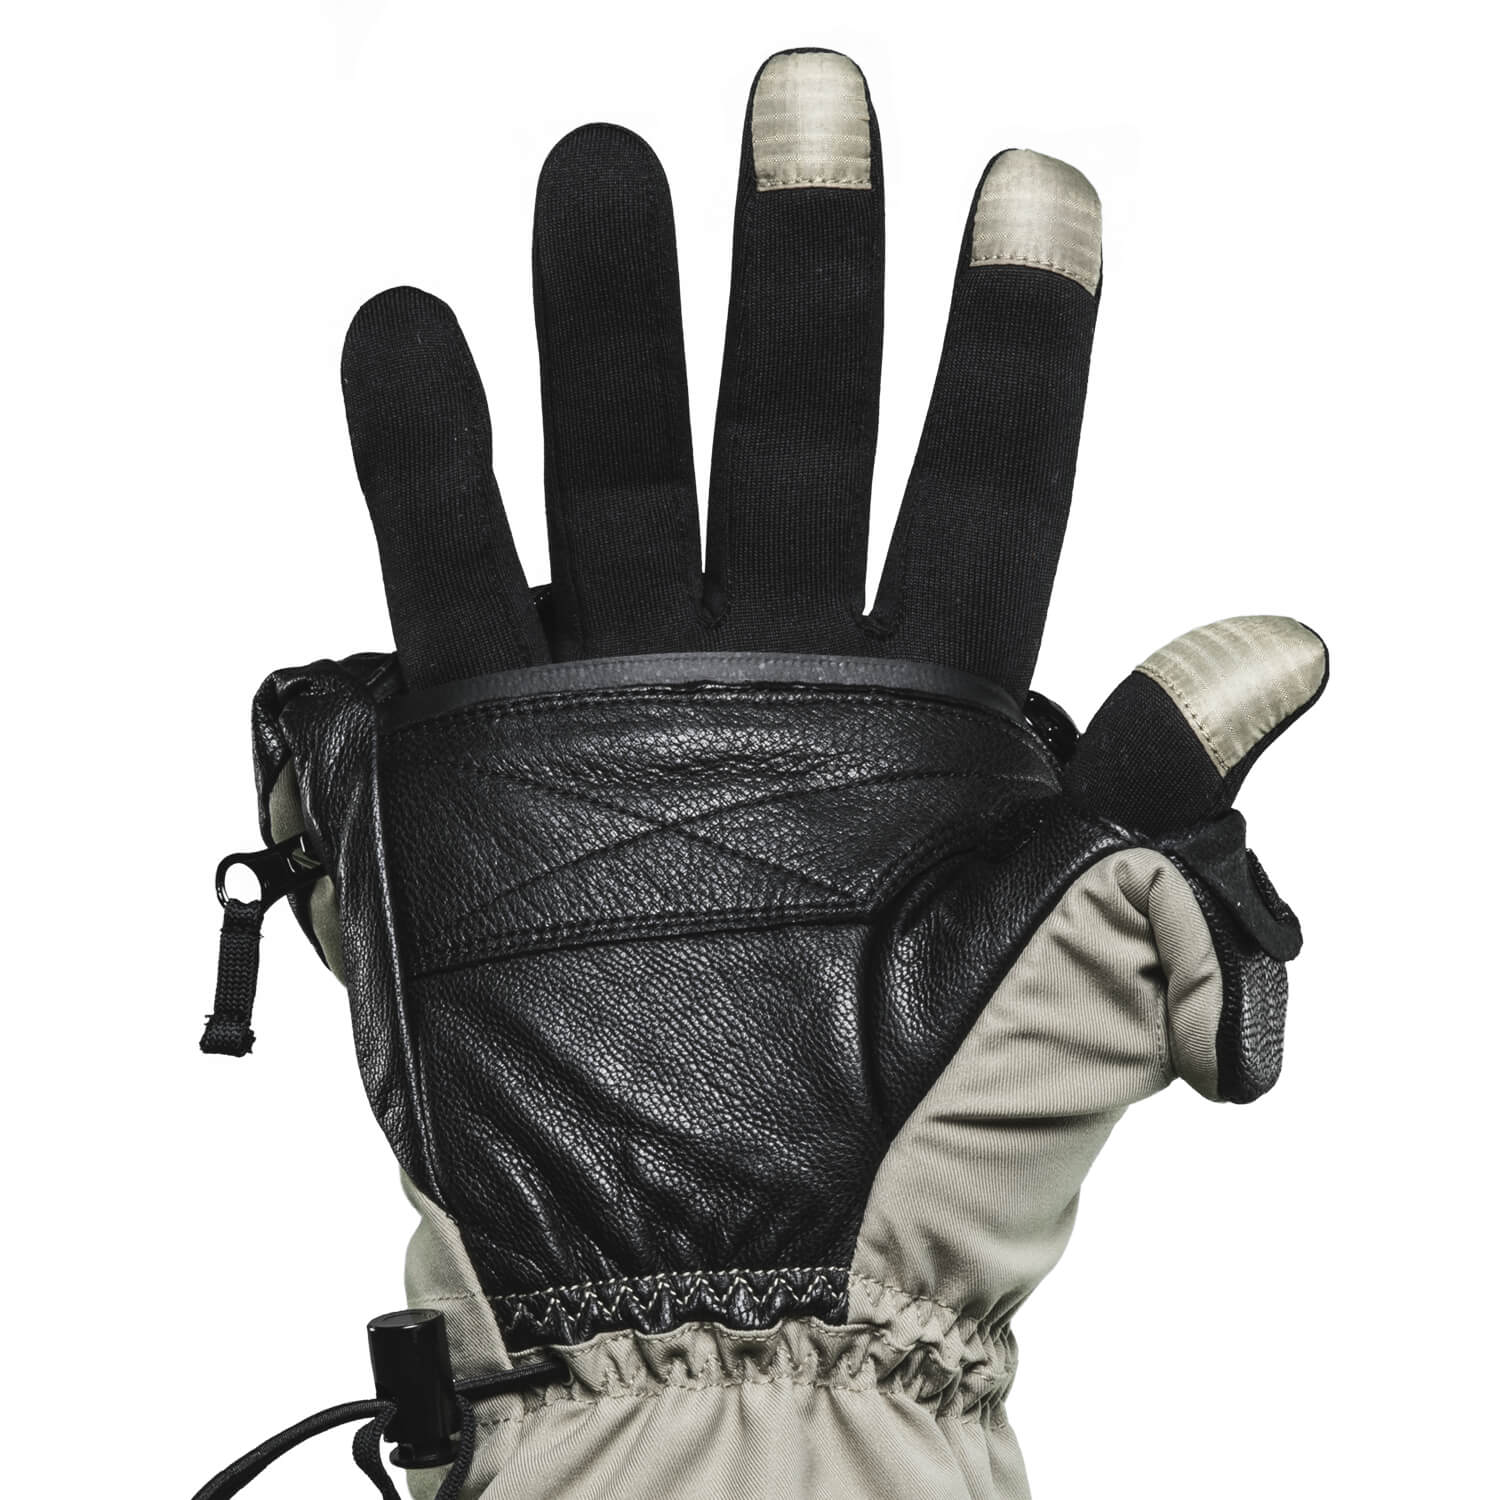 FOLD BACK FINGER LG NEW TOP GUN ALL WEATHER LEATHER FINISHED SHOOTING GLOVES 